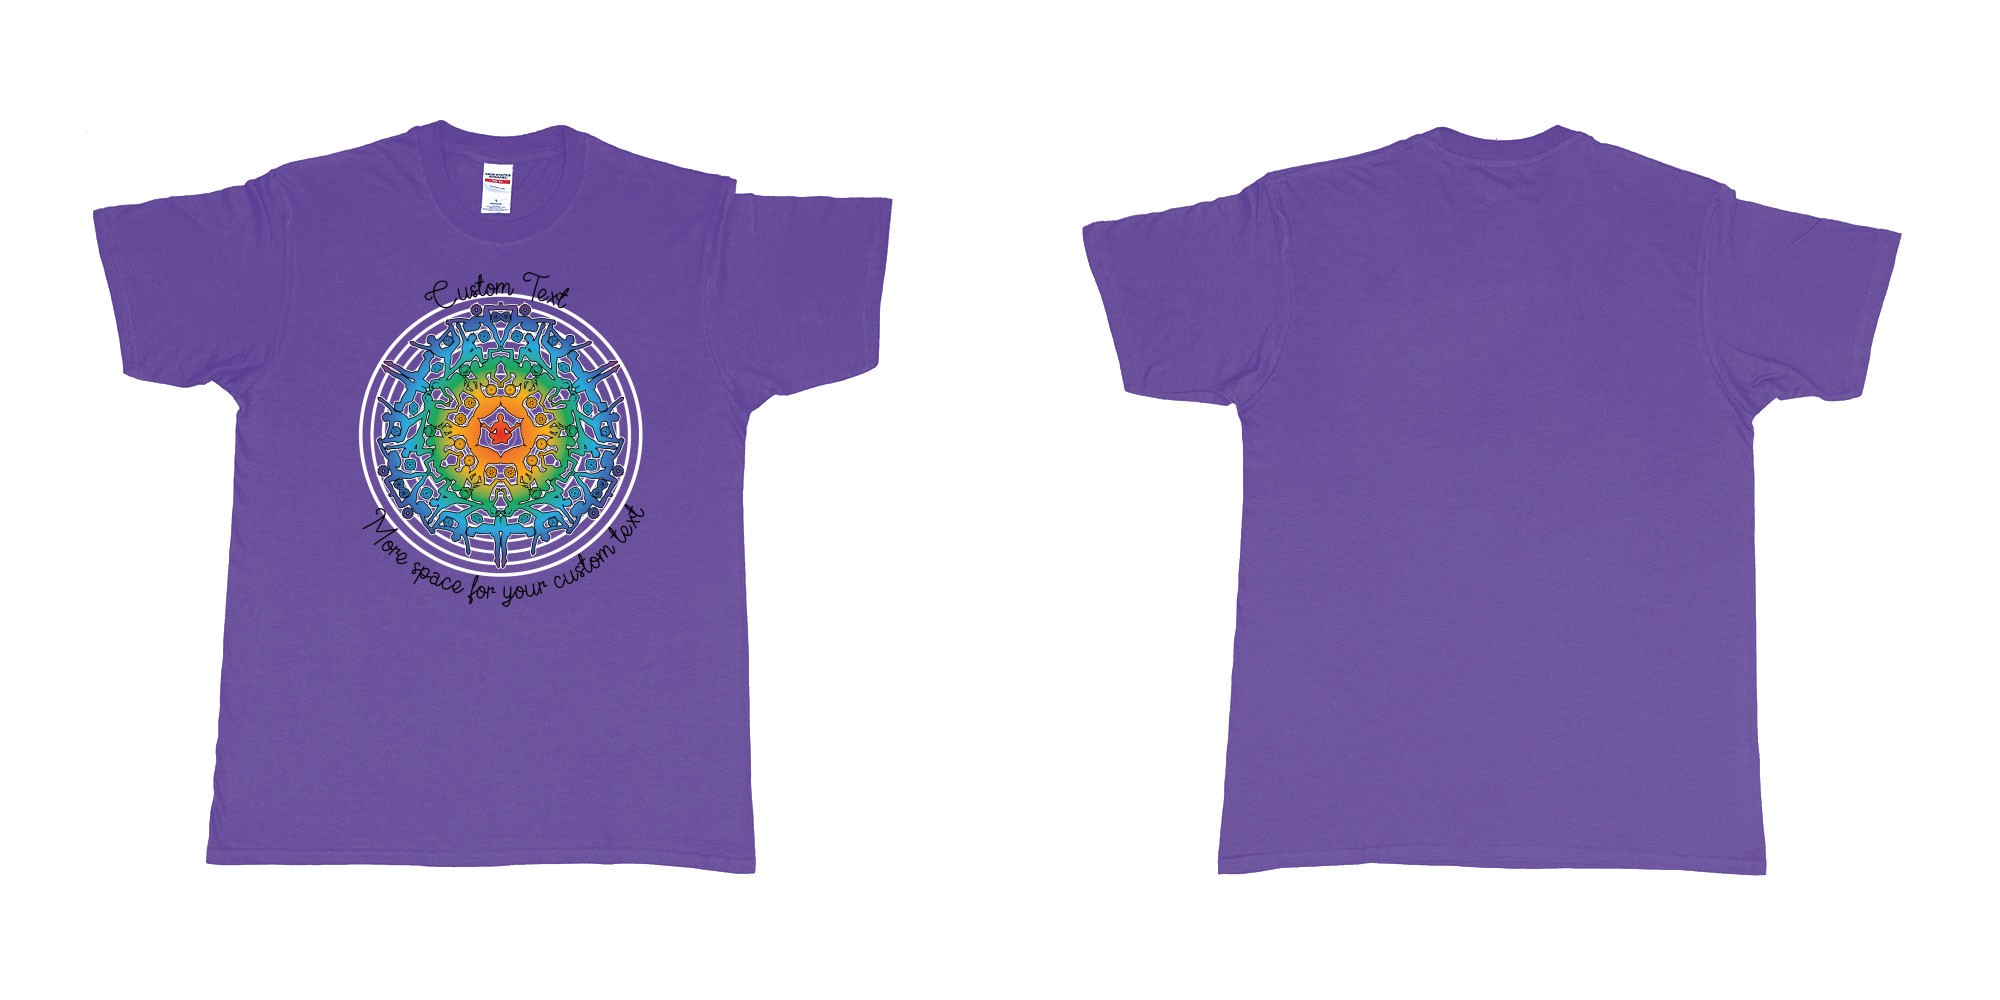 Custom tshirt design yoga mandala in fabric color purple choice your own text made in Bali by The Pirate Way